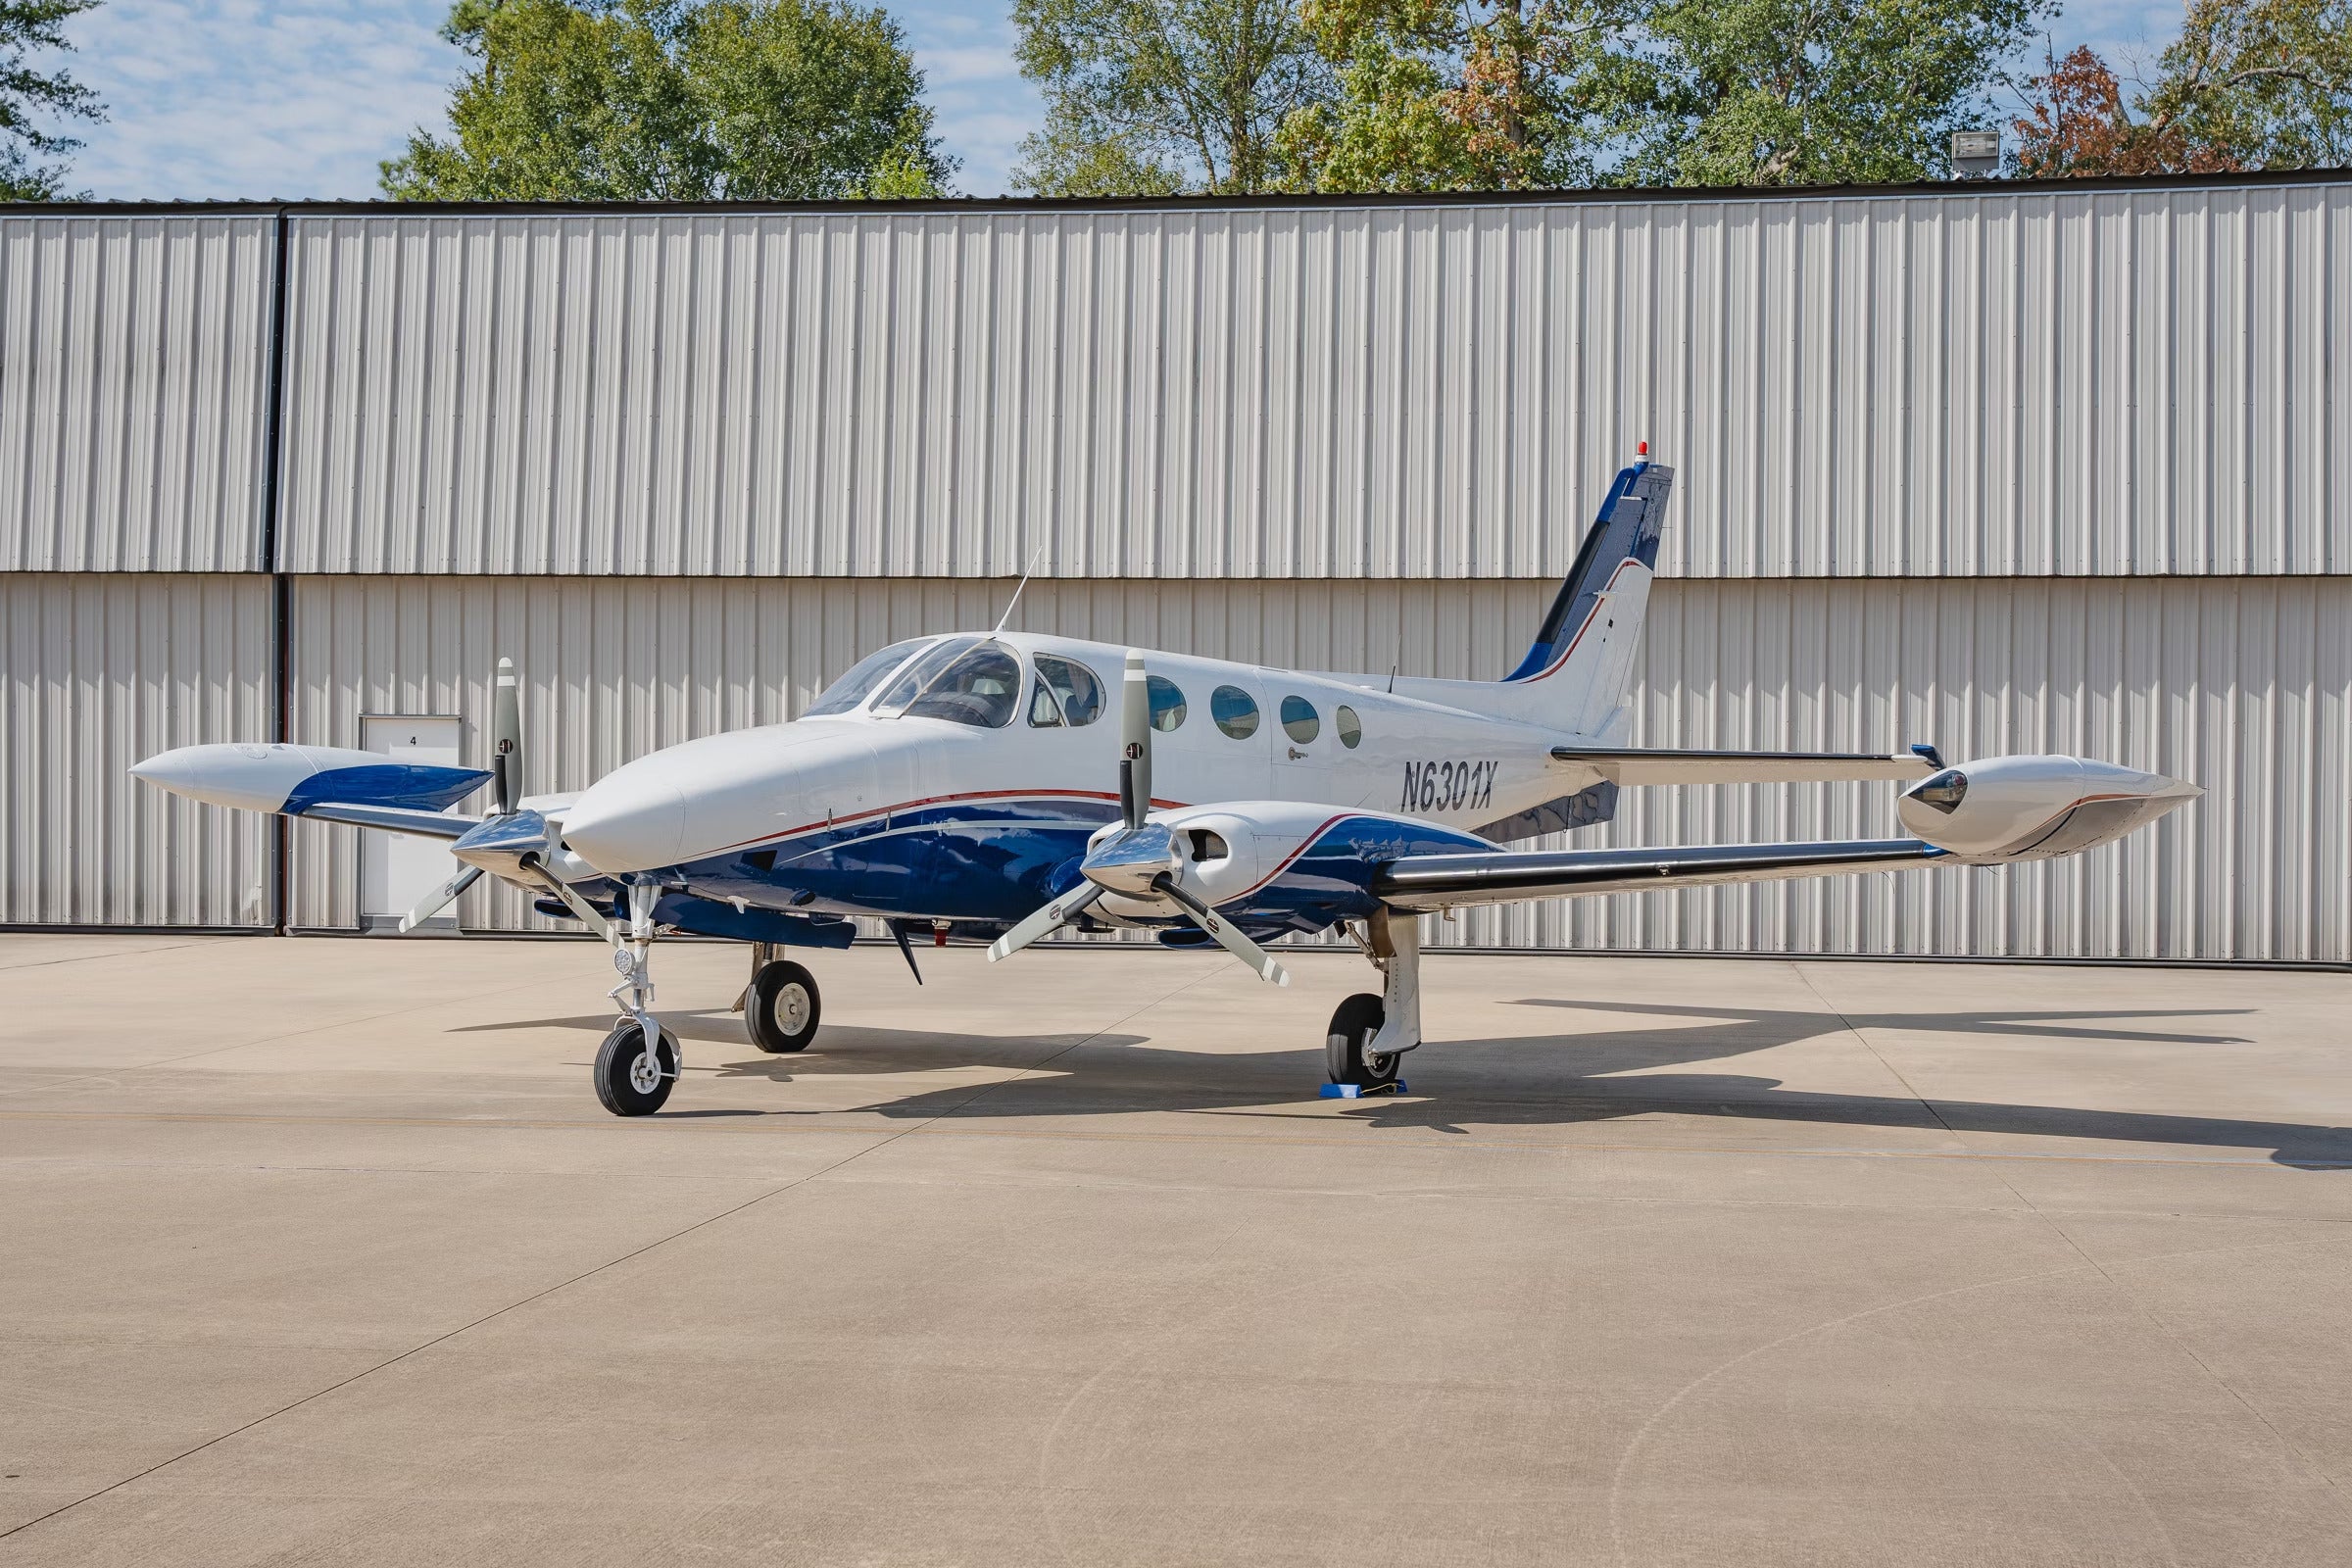 Cessna’s Pressurized, Air-Conditioned 340A Is a Family-Friendly ‘AircraftForSale’ Top Pick